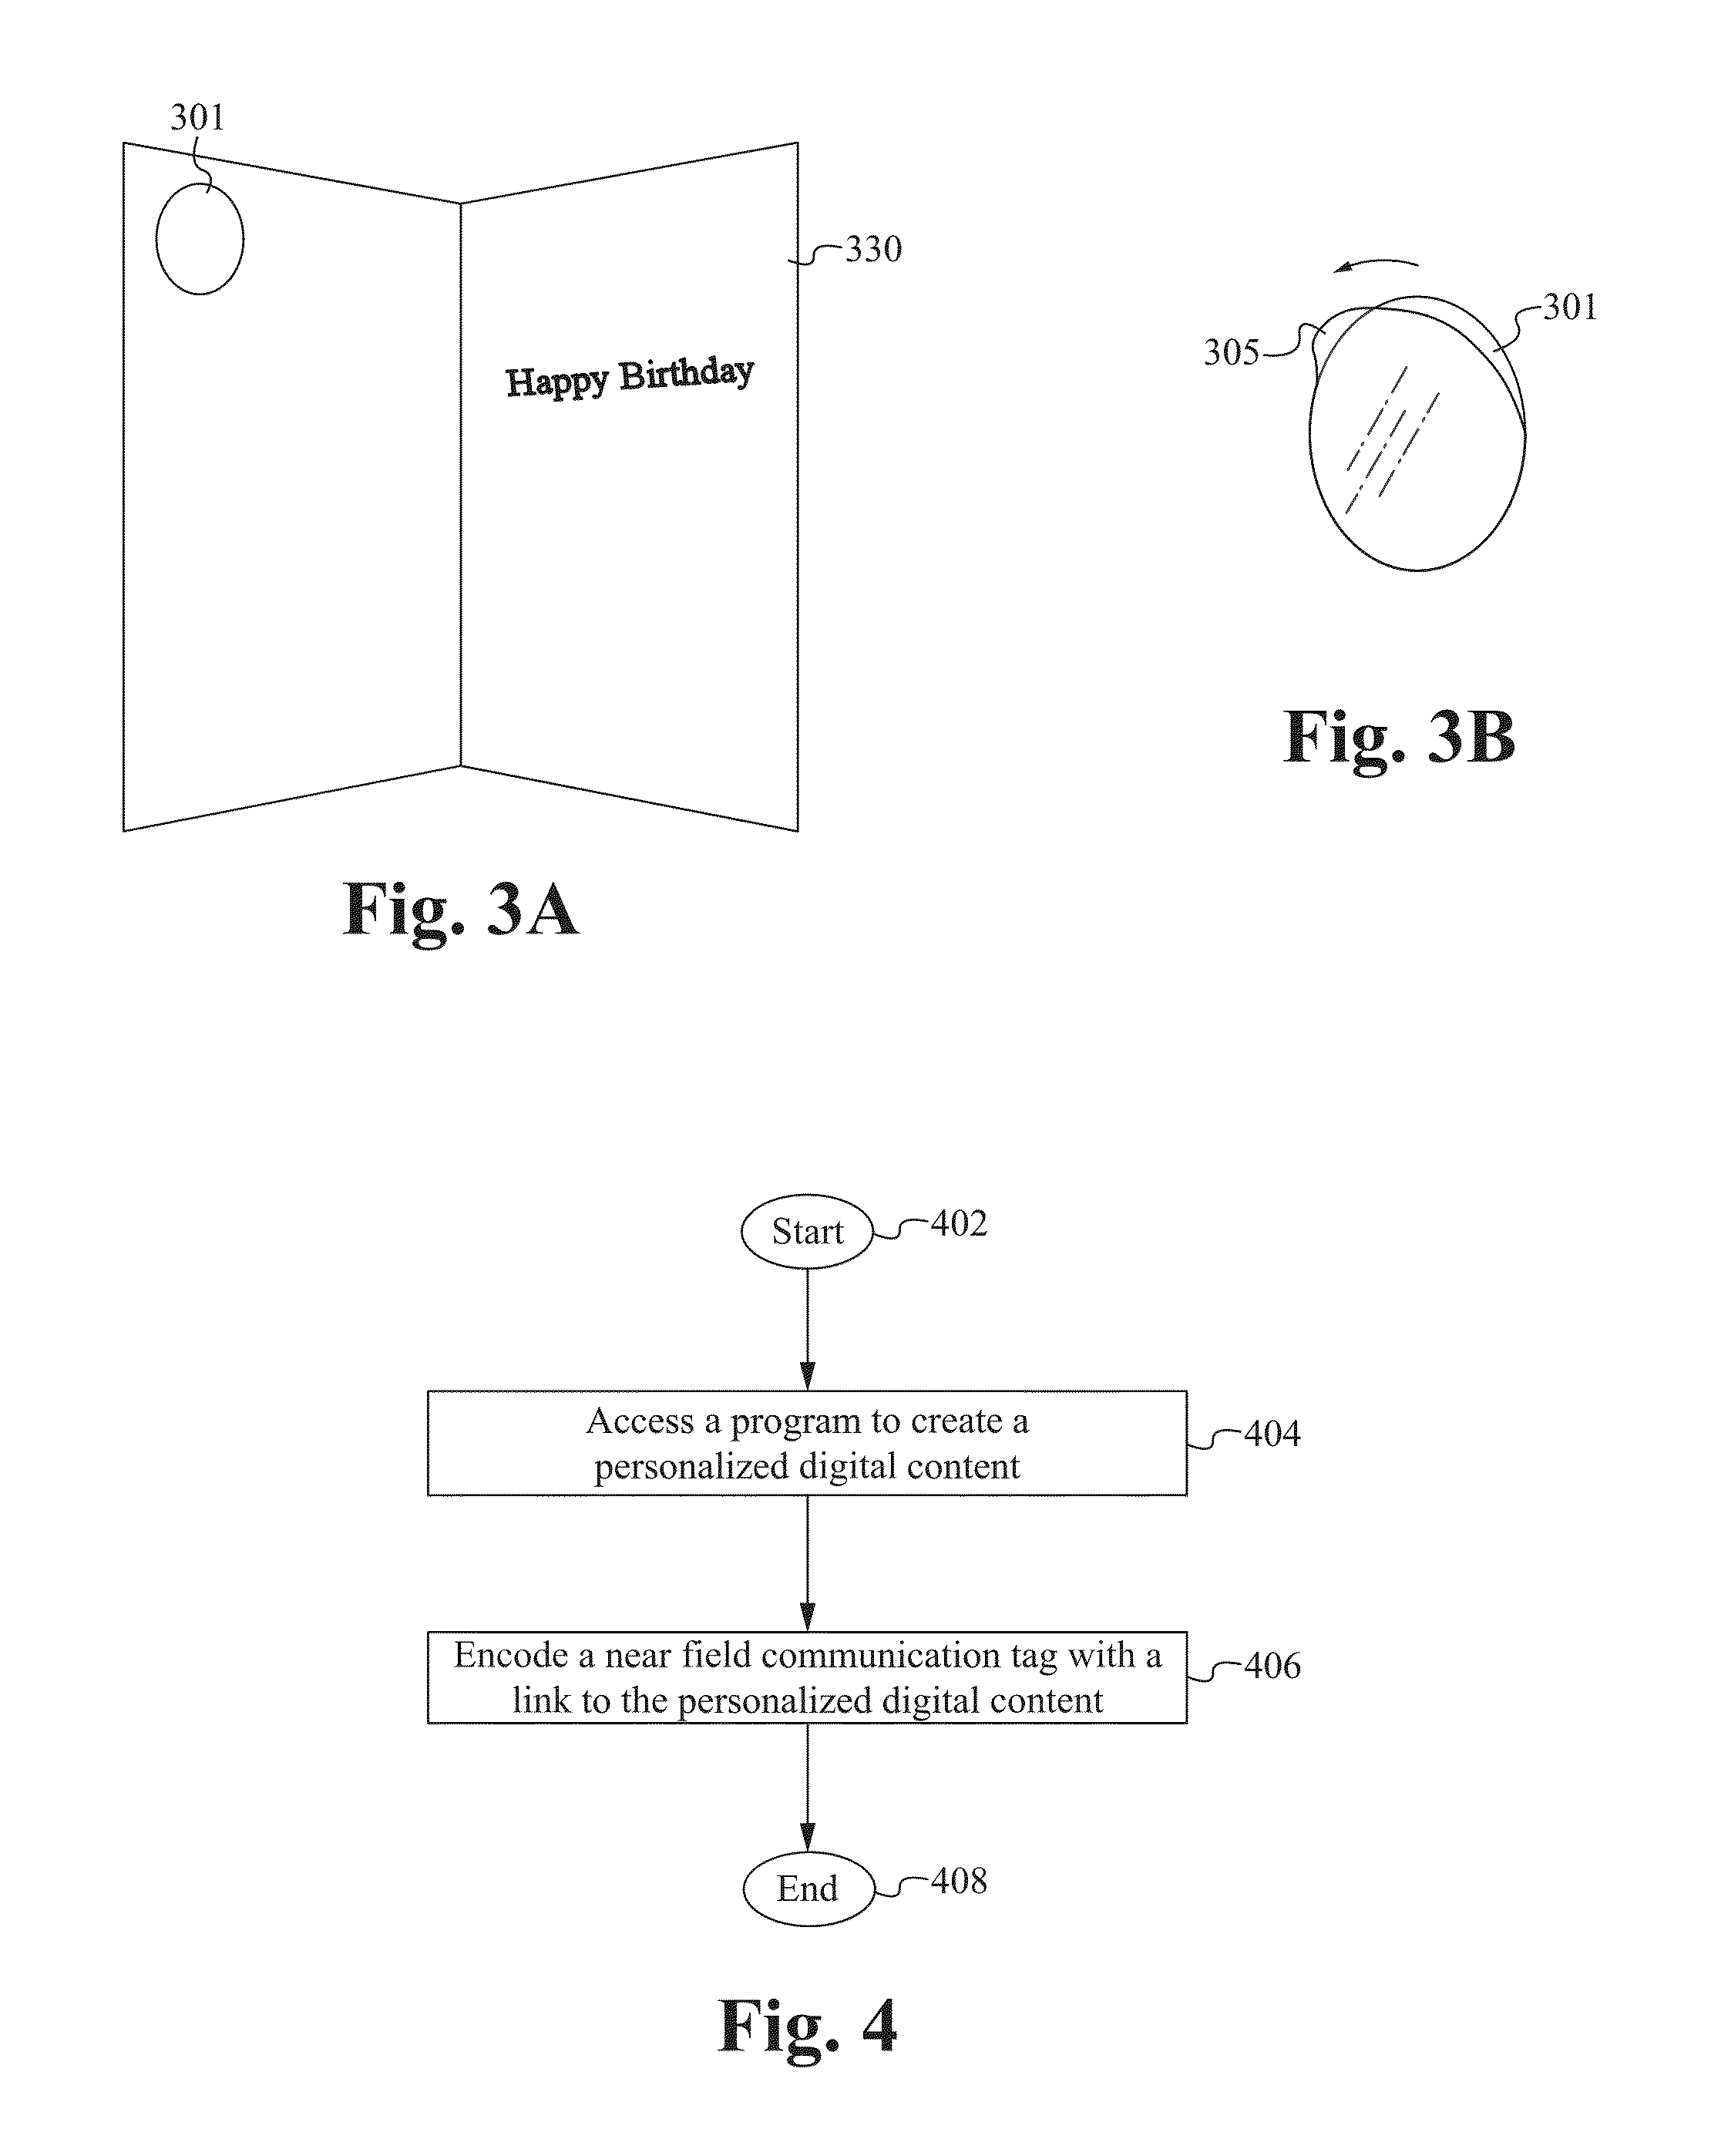 Methods and systems for preventing tampering of a smart tag